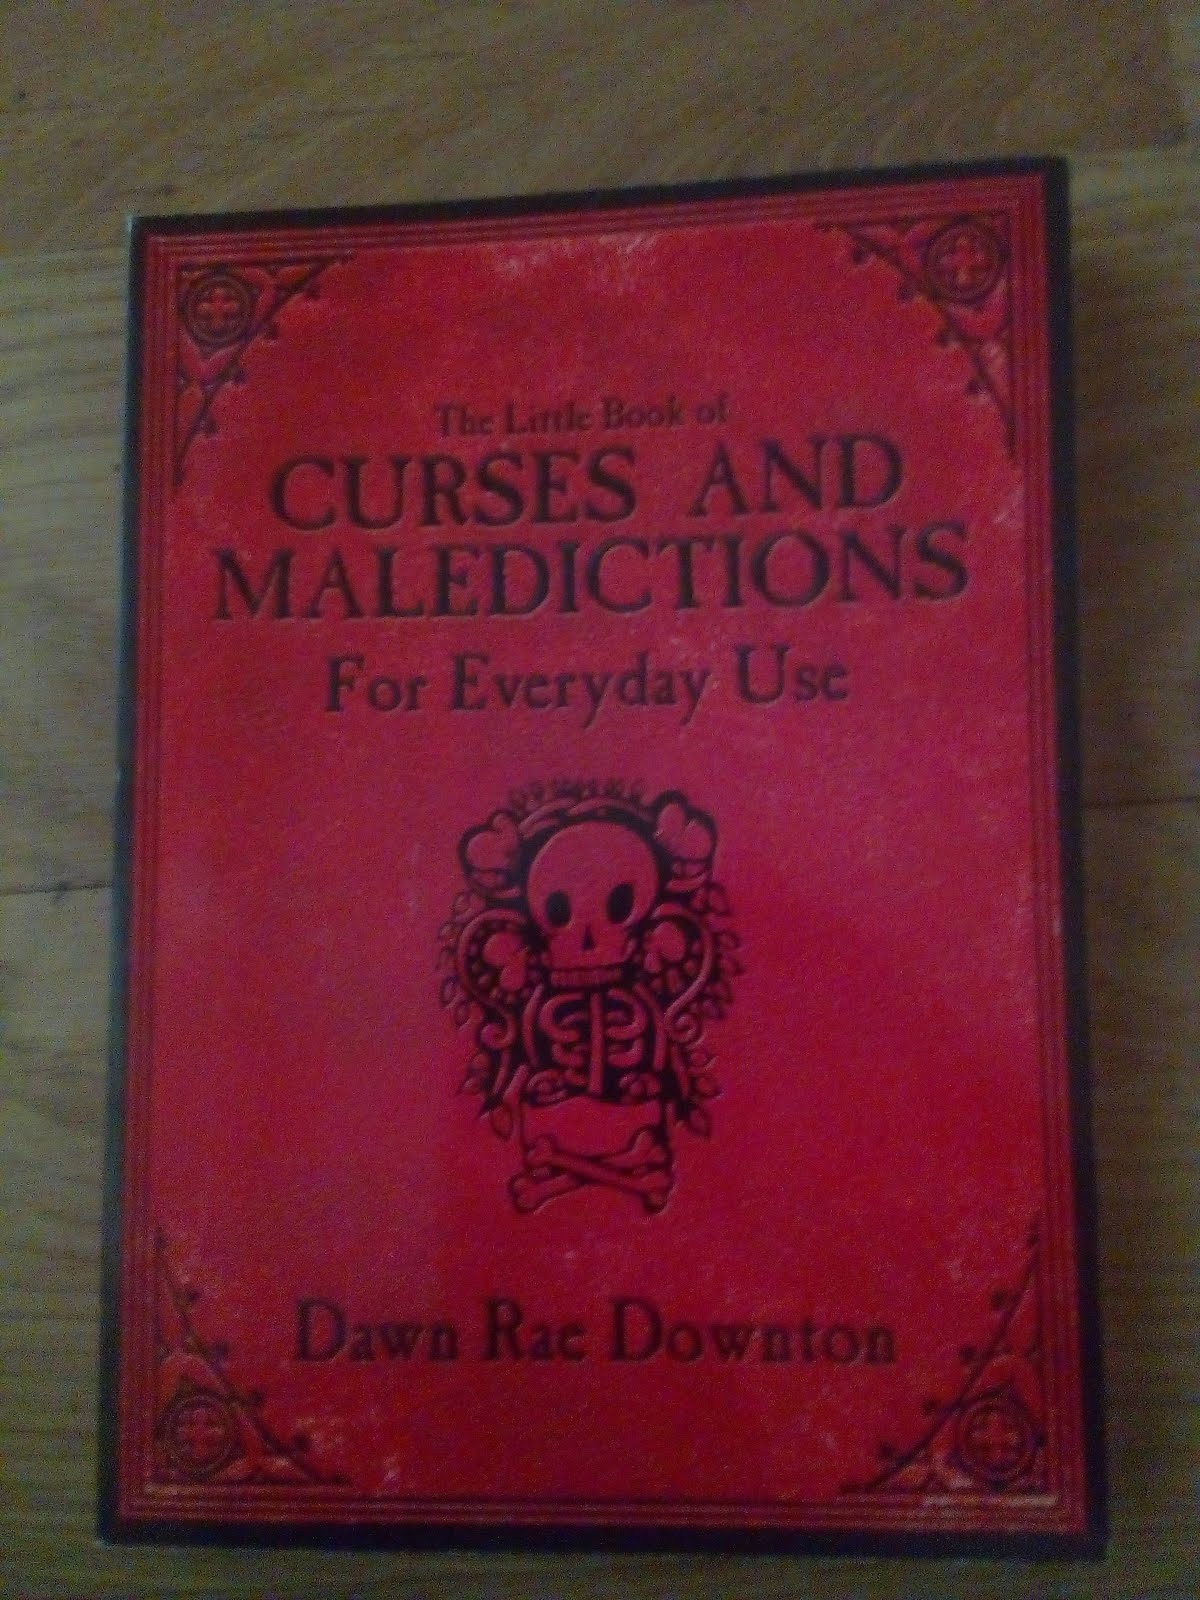 The Little Book about Curses.